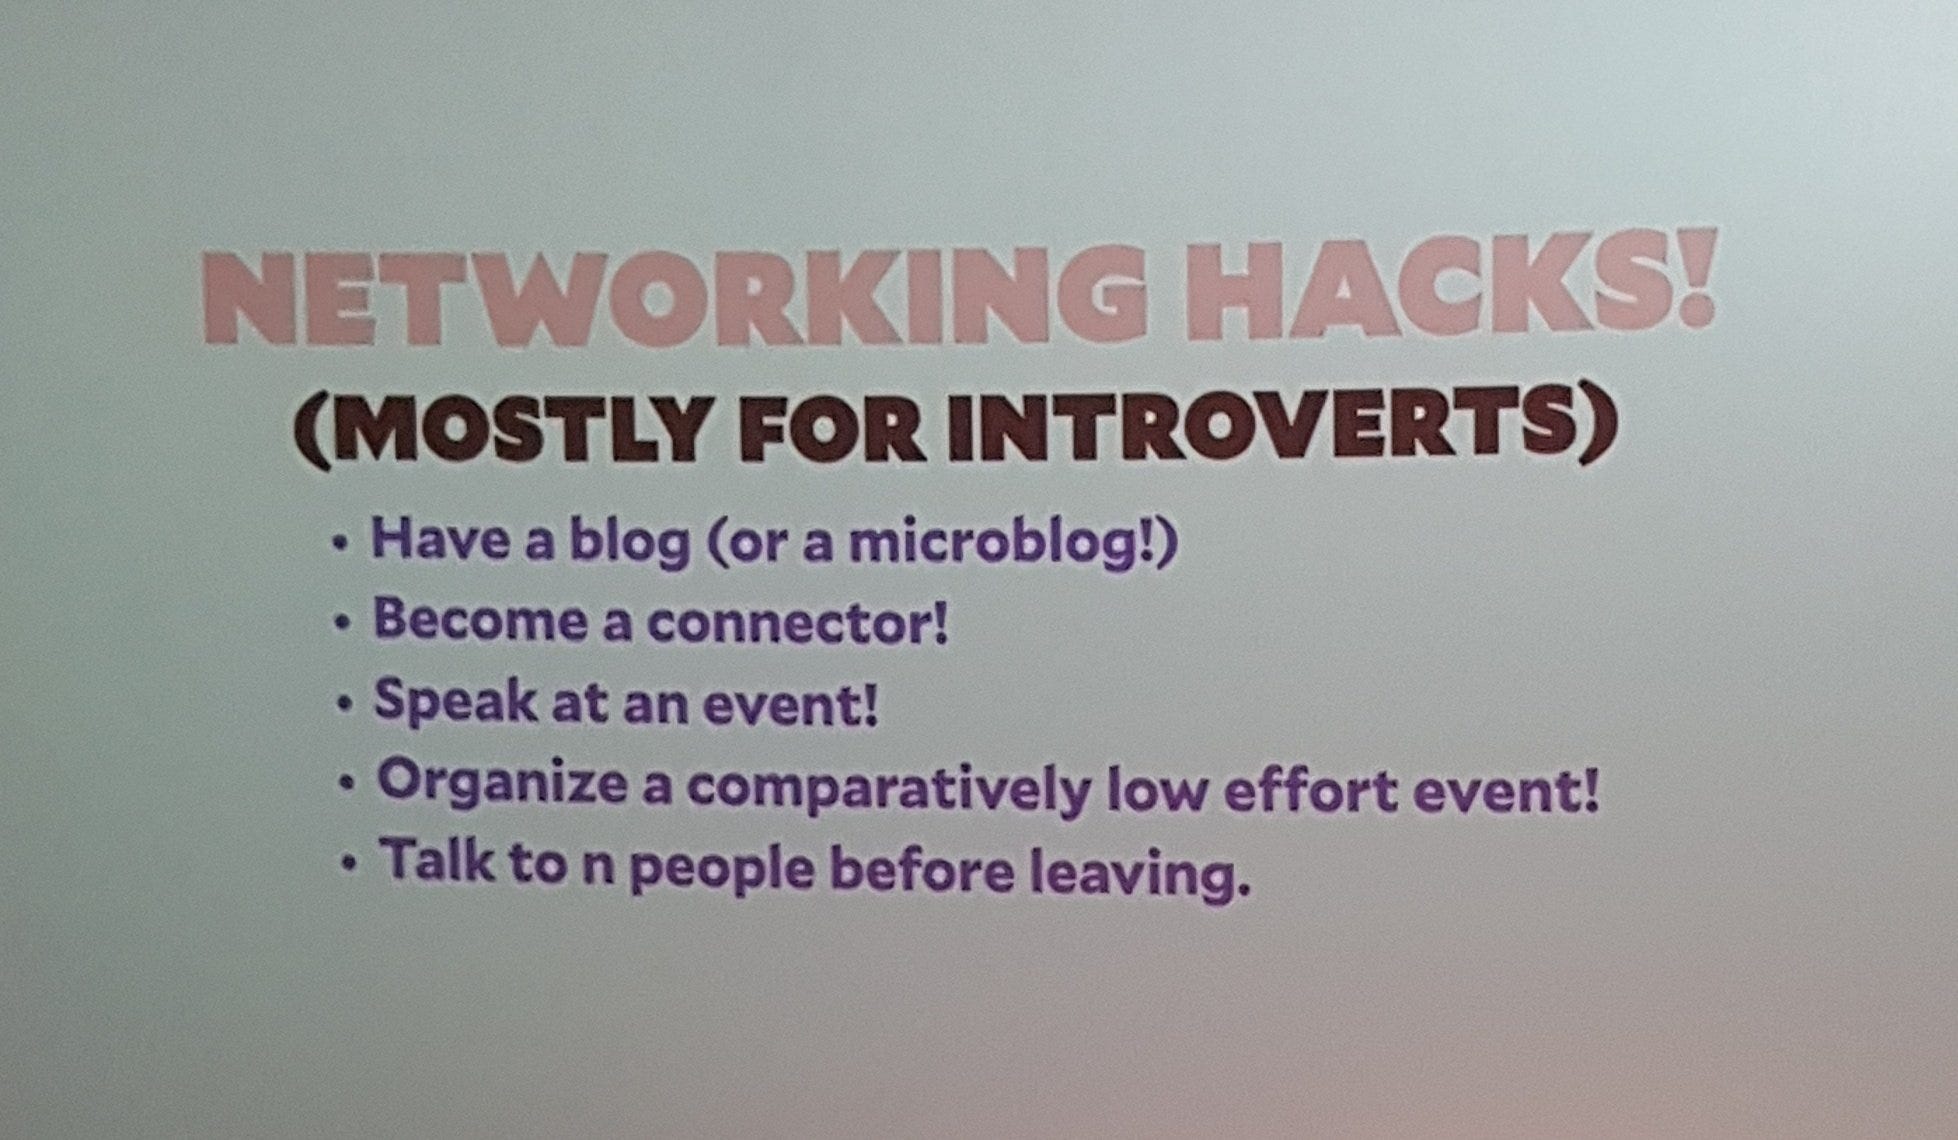 Networking Hacks (Mostly for introverts)